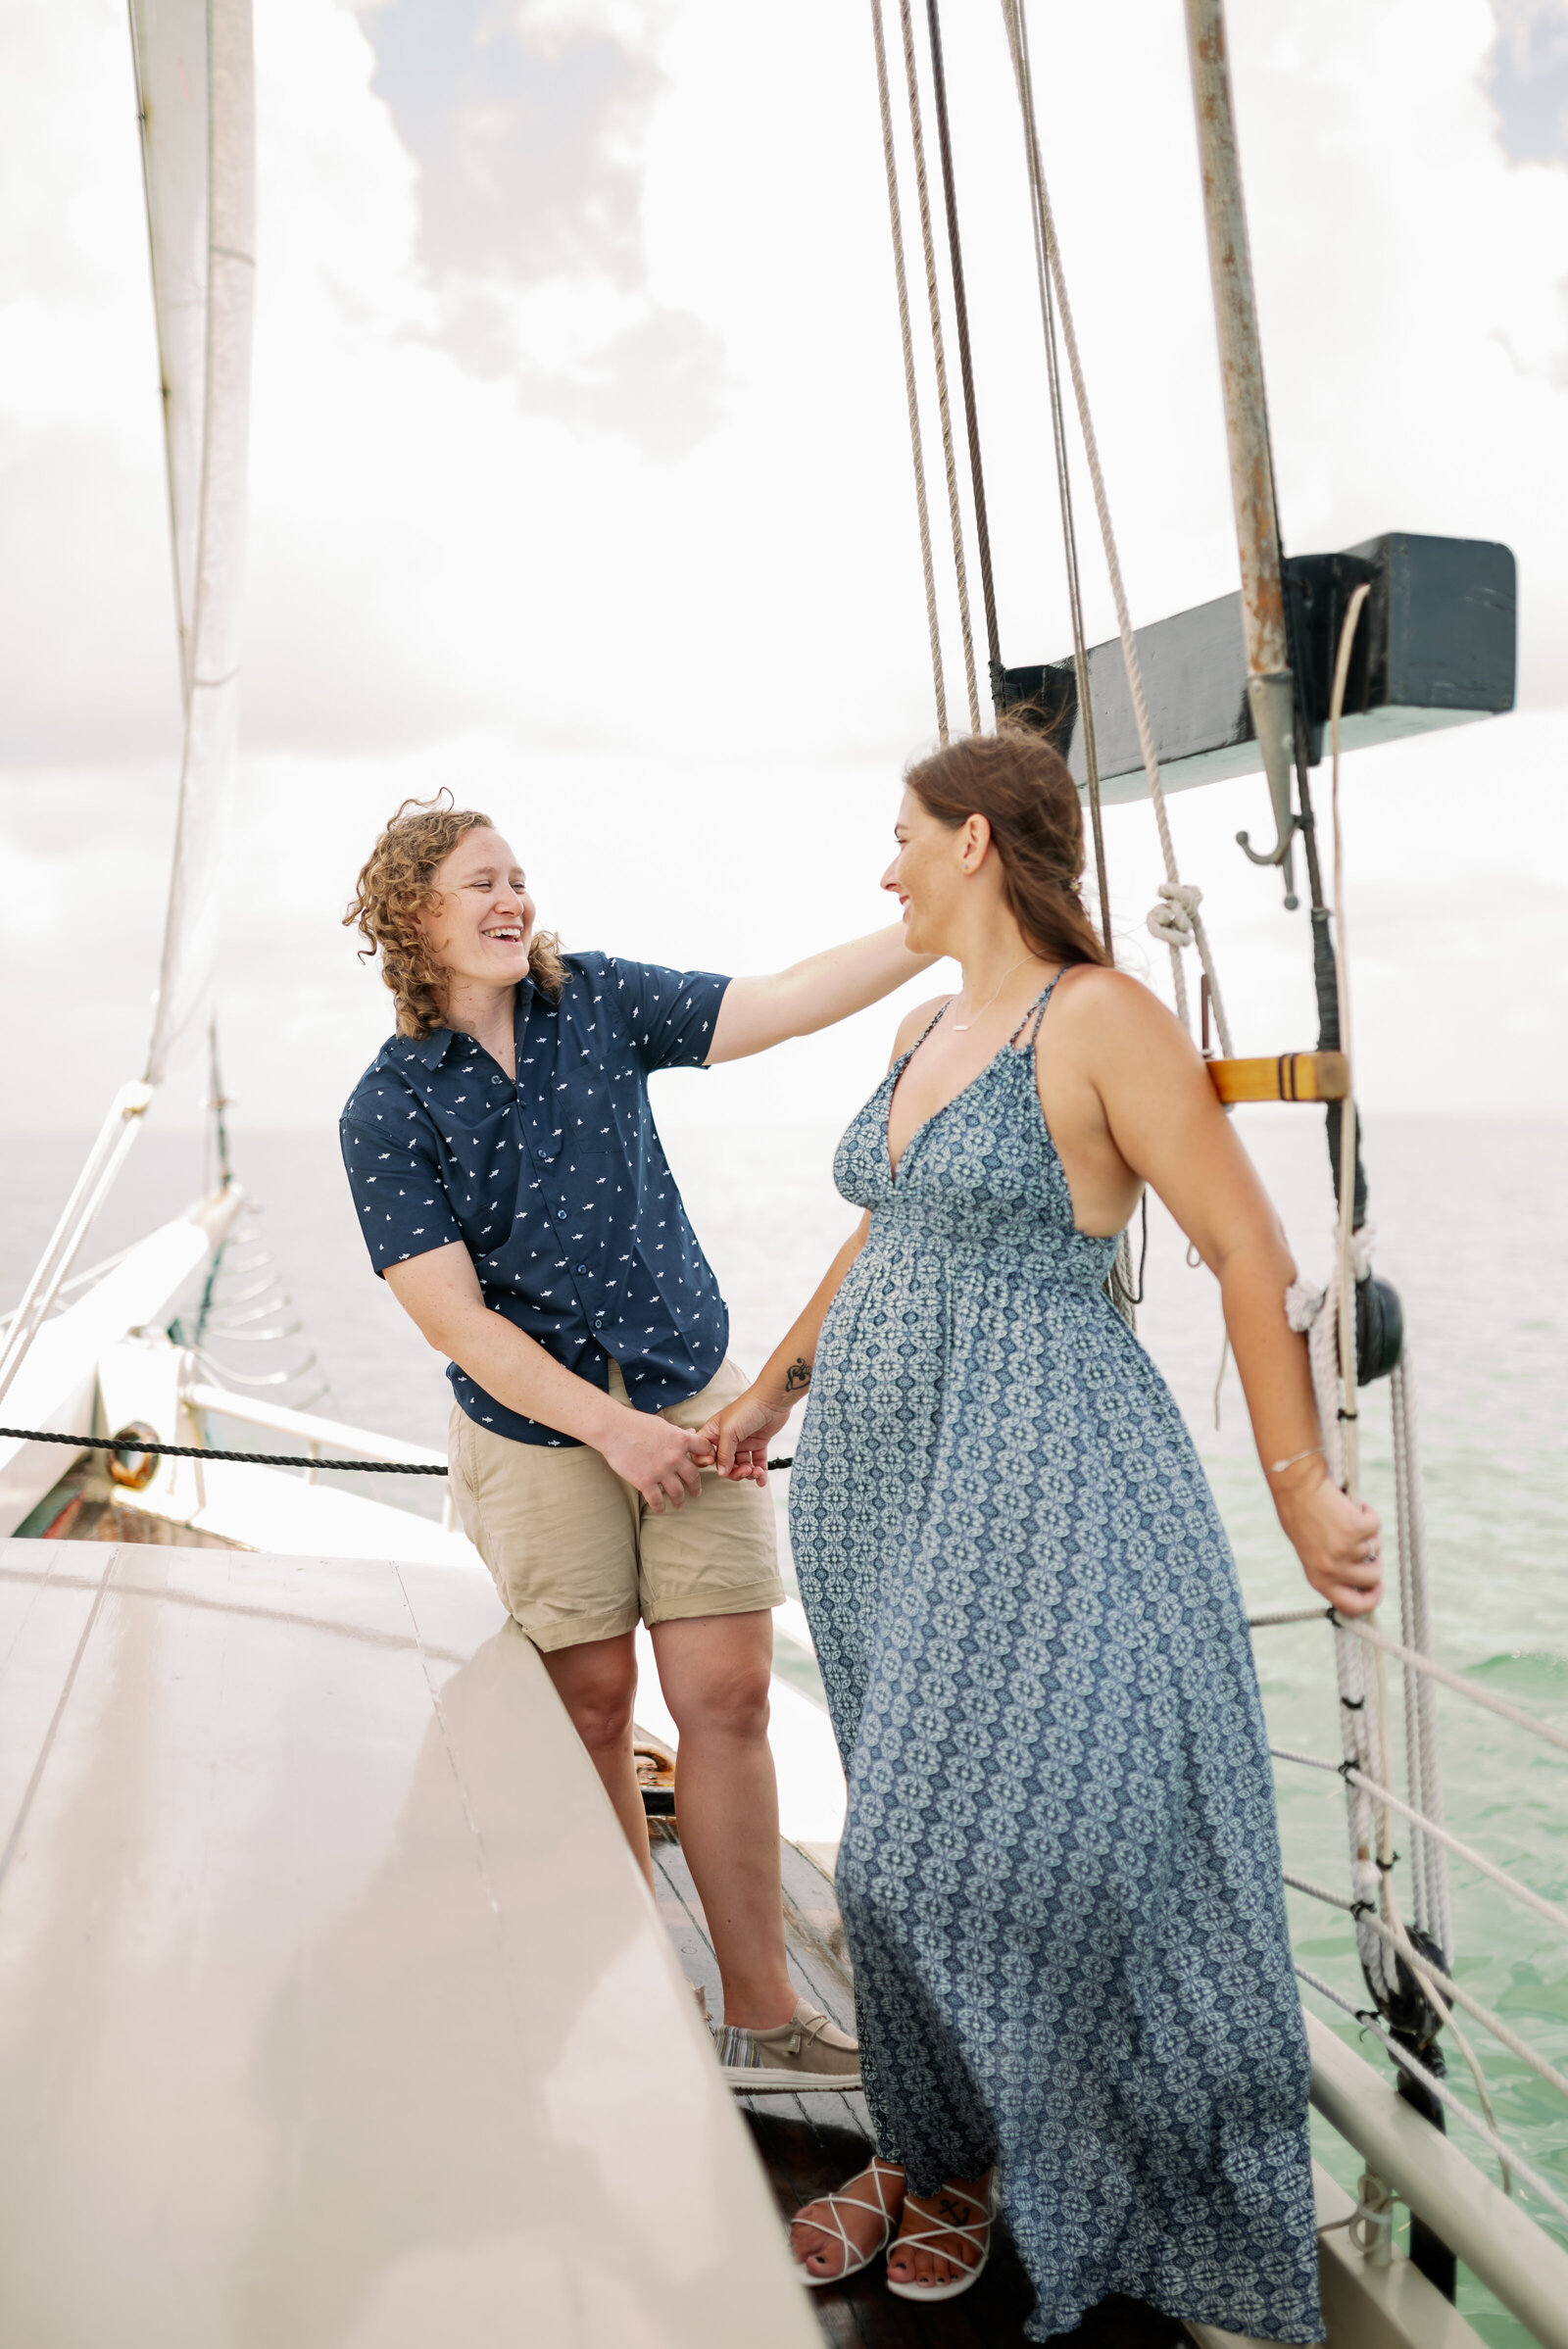 engaged lesbian couple on a sailboat standing together, holding hands, one woman is leaning slightly sideways, both are looking at each other